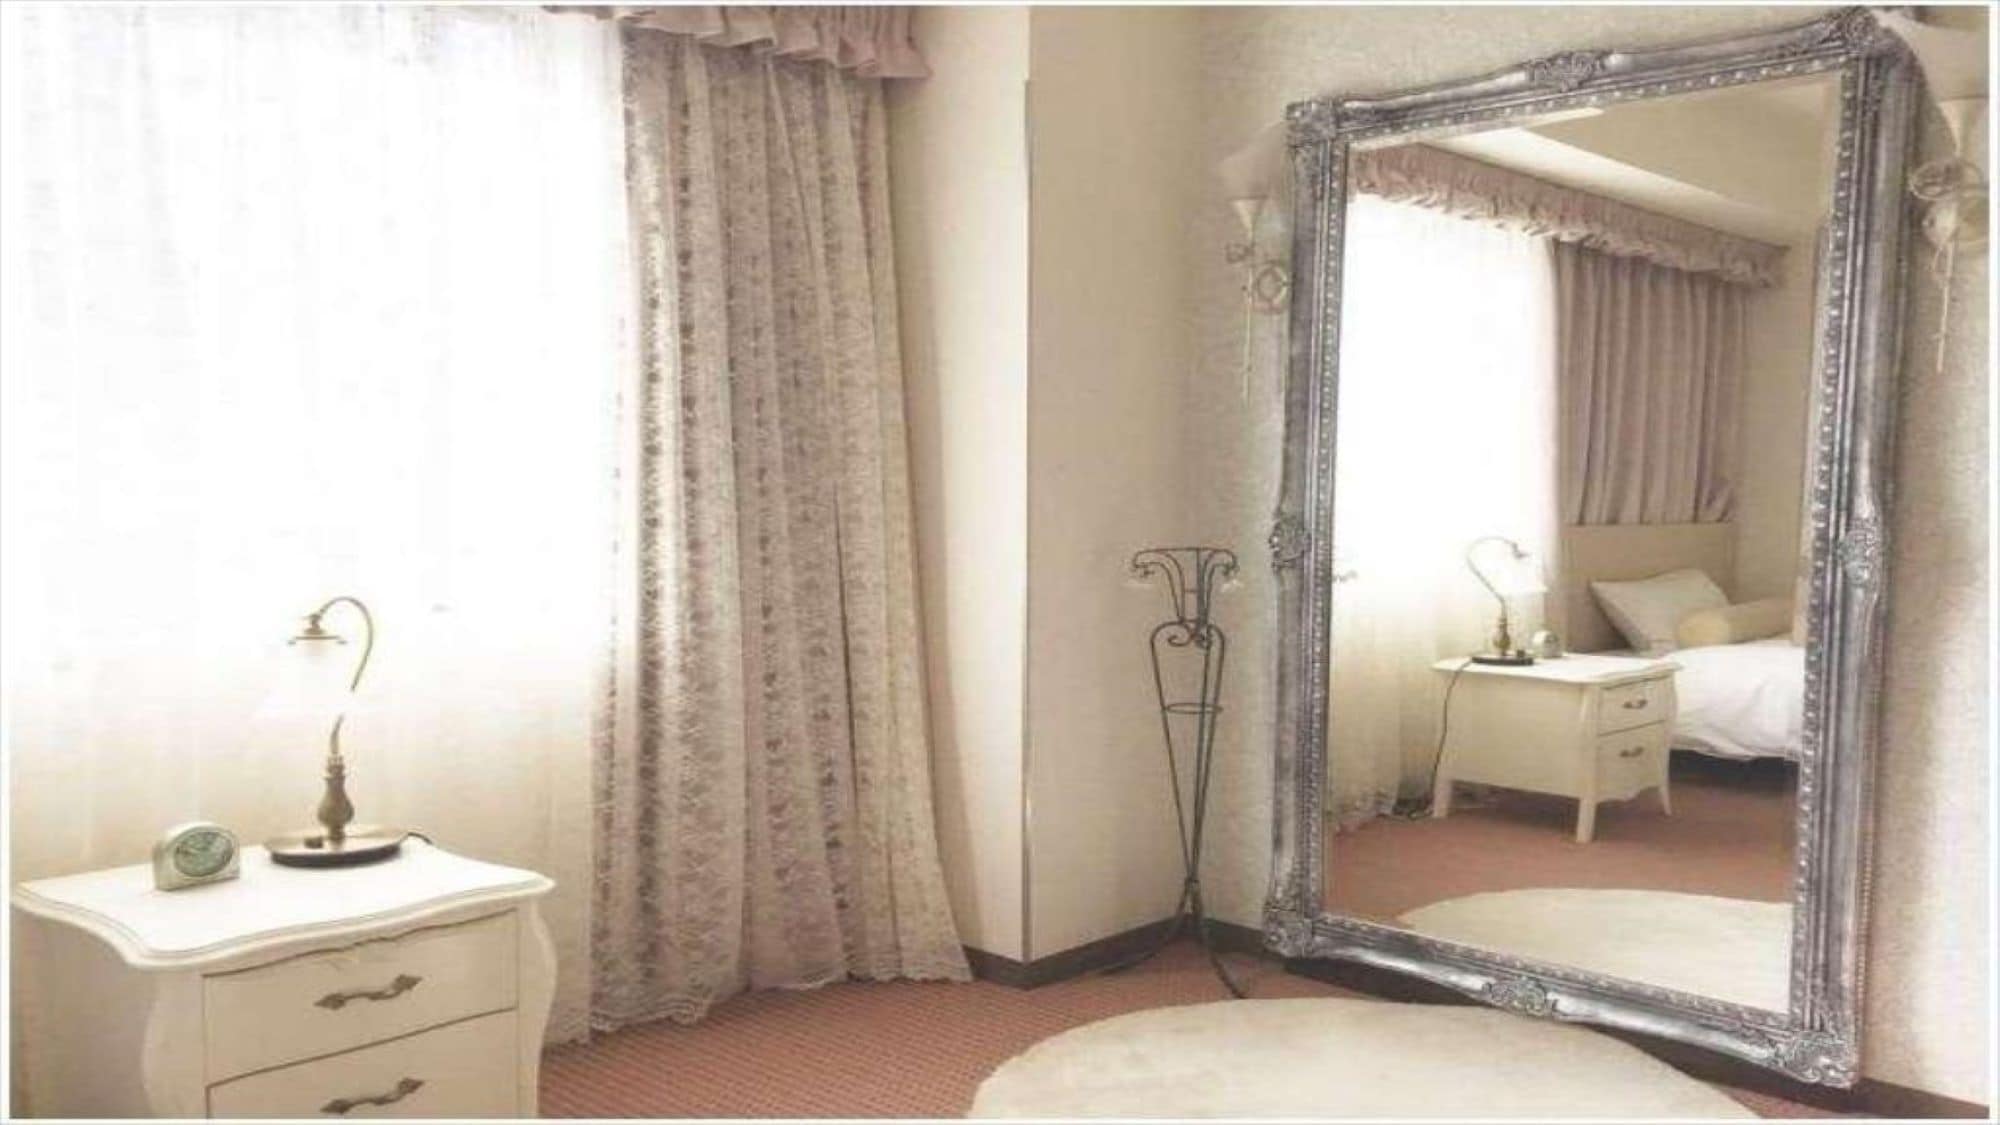 [Women's room] Single room for women only. Accommodation is limited to women. Marked with a big figure and dresser